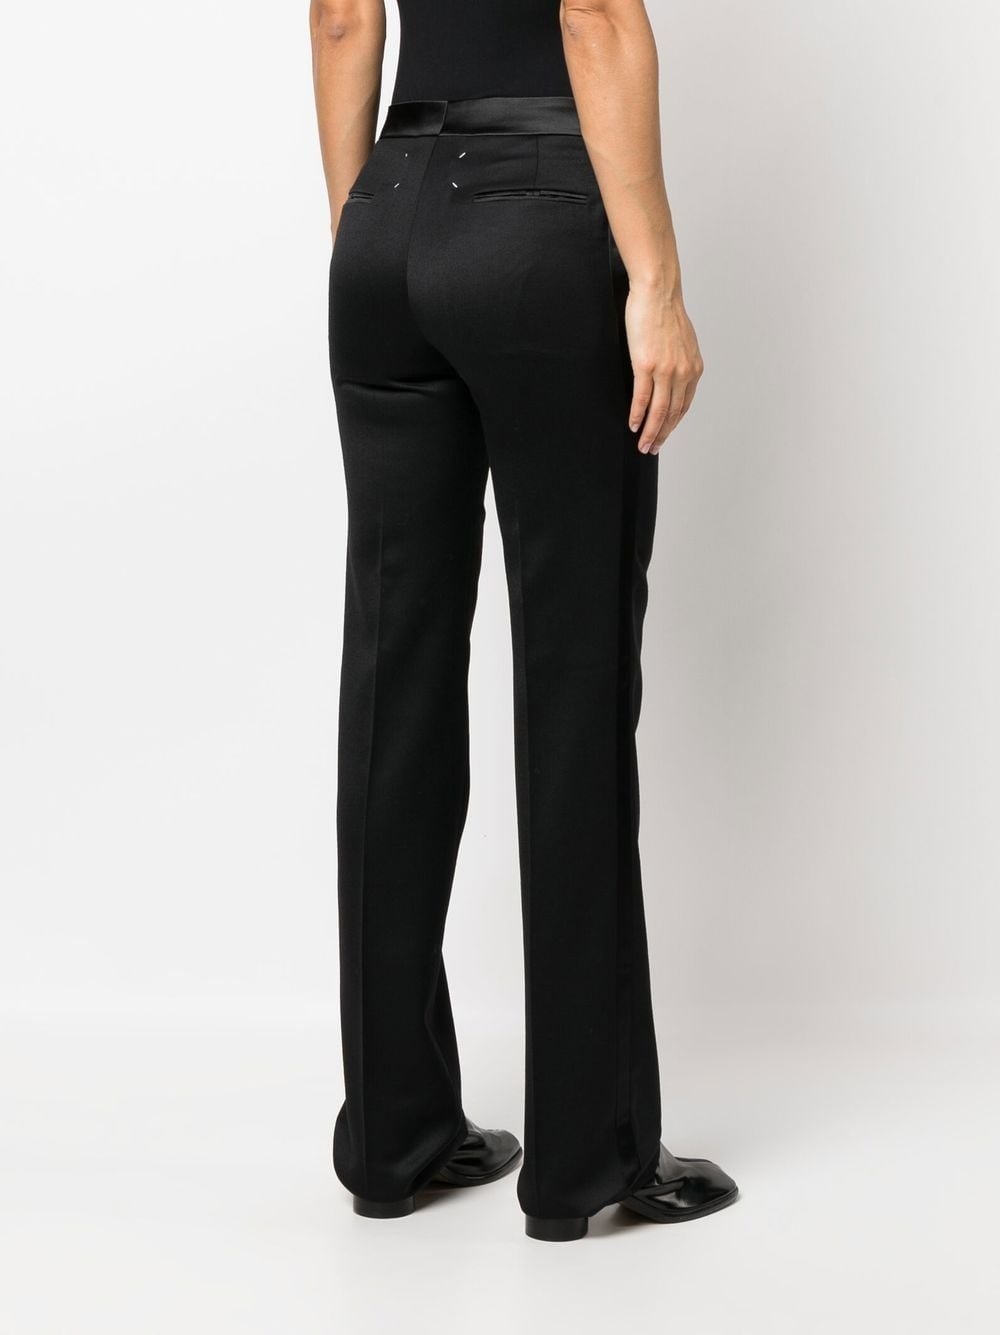 four-stitch tailored tuxedo trousers - 4